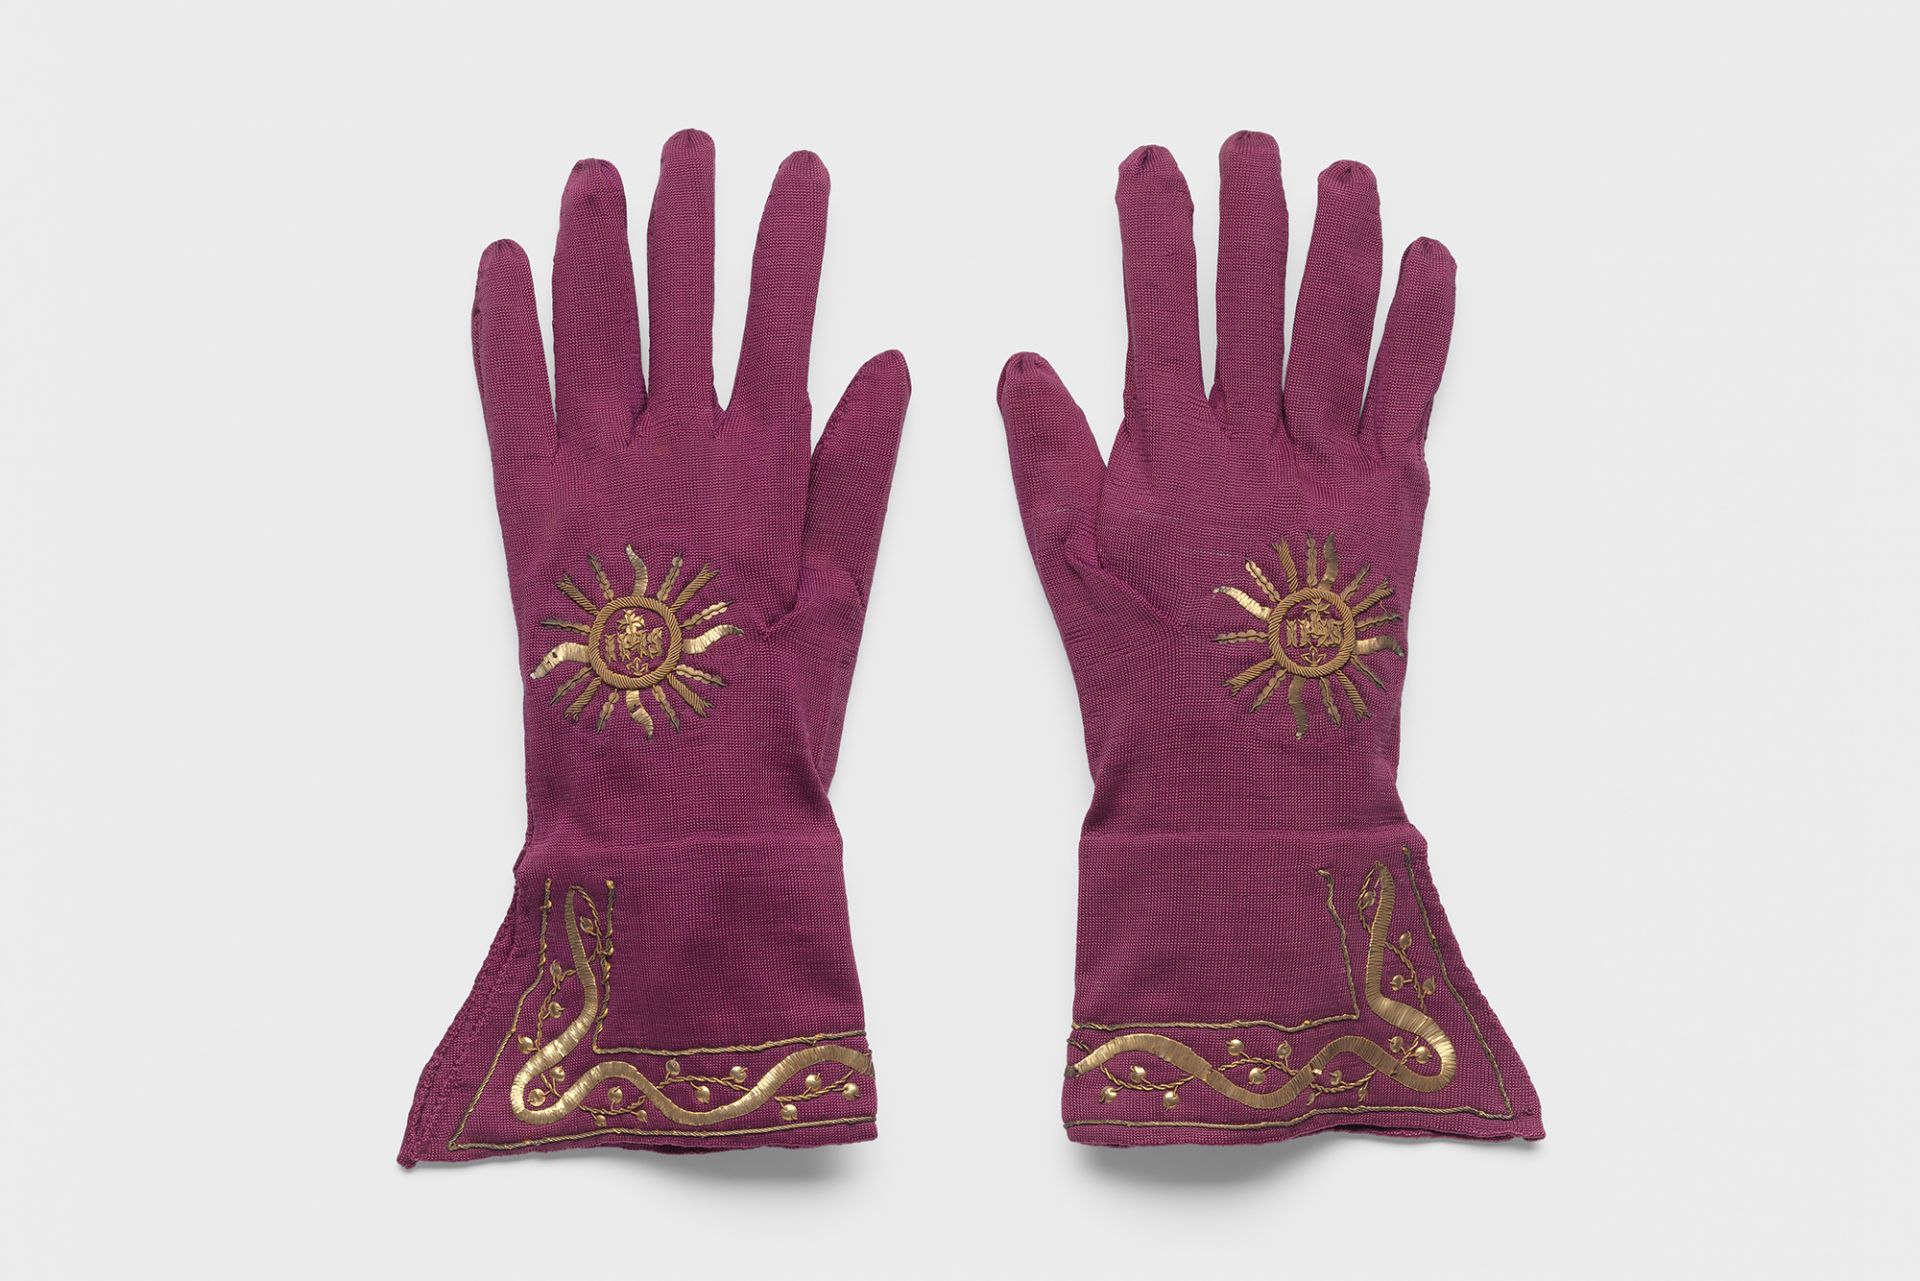 Pontifical gloves, Rome, Italy, probably 18th c.